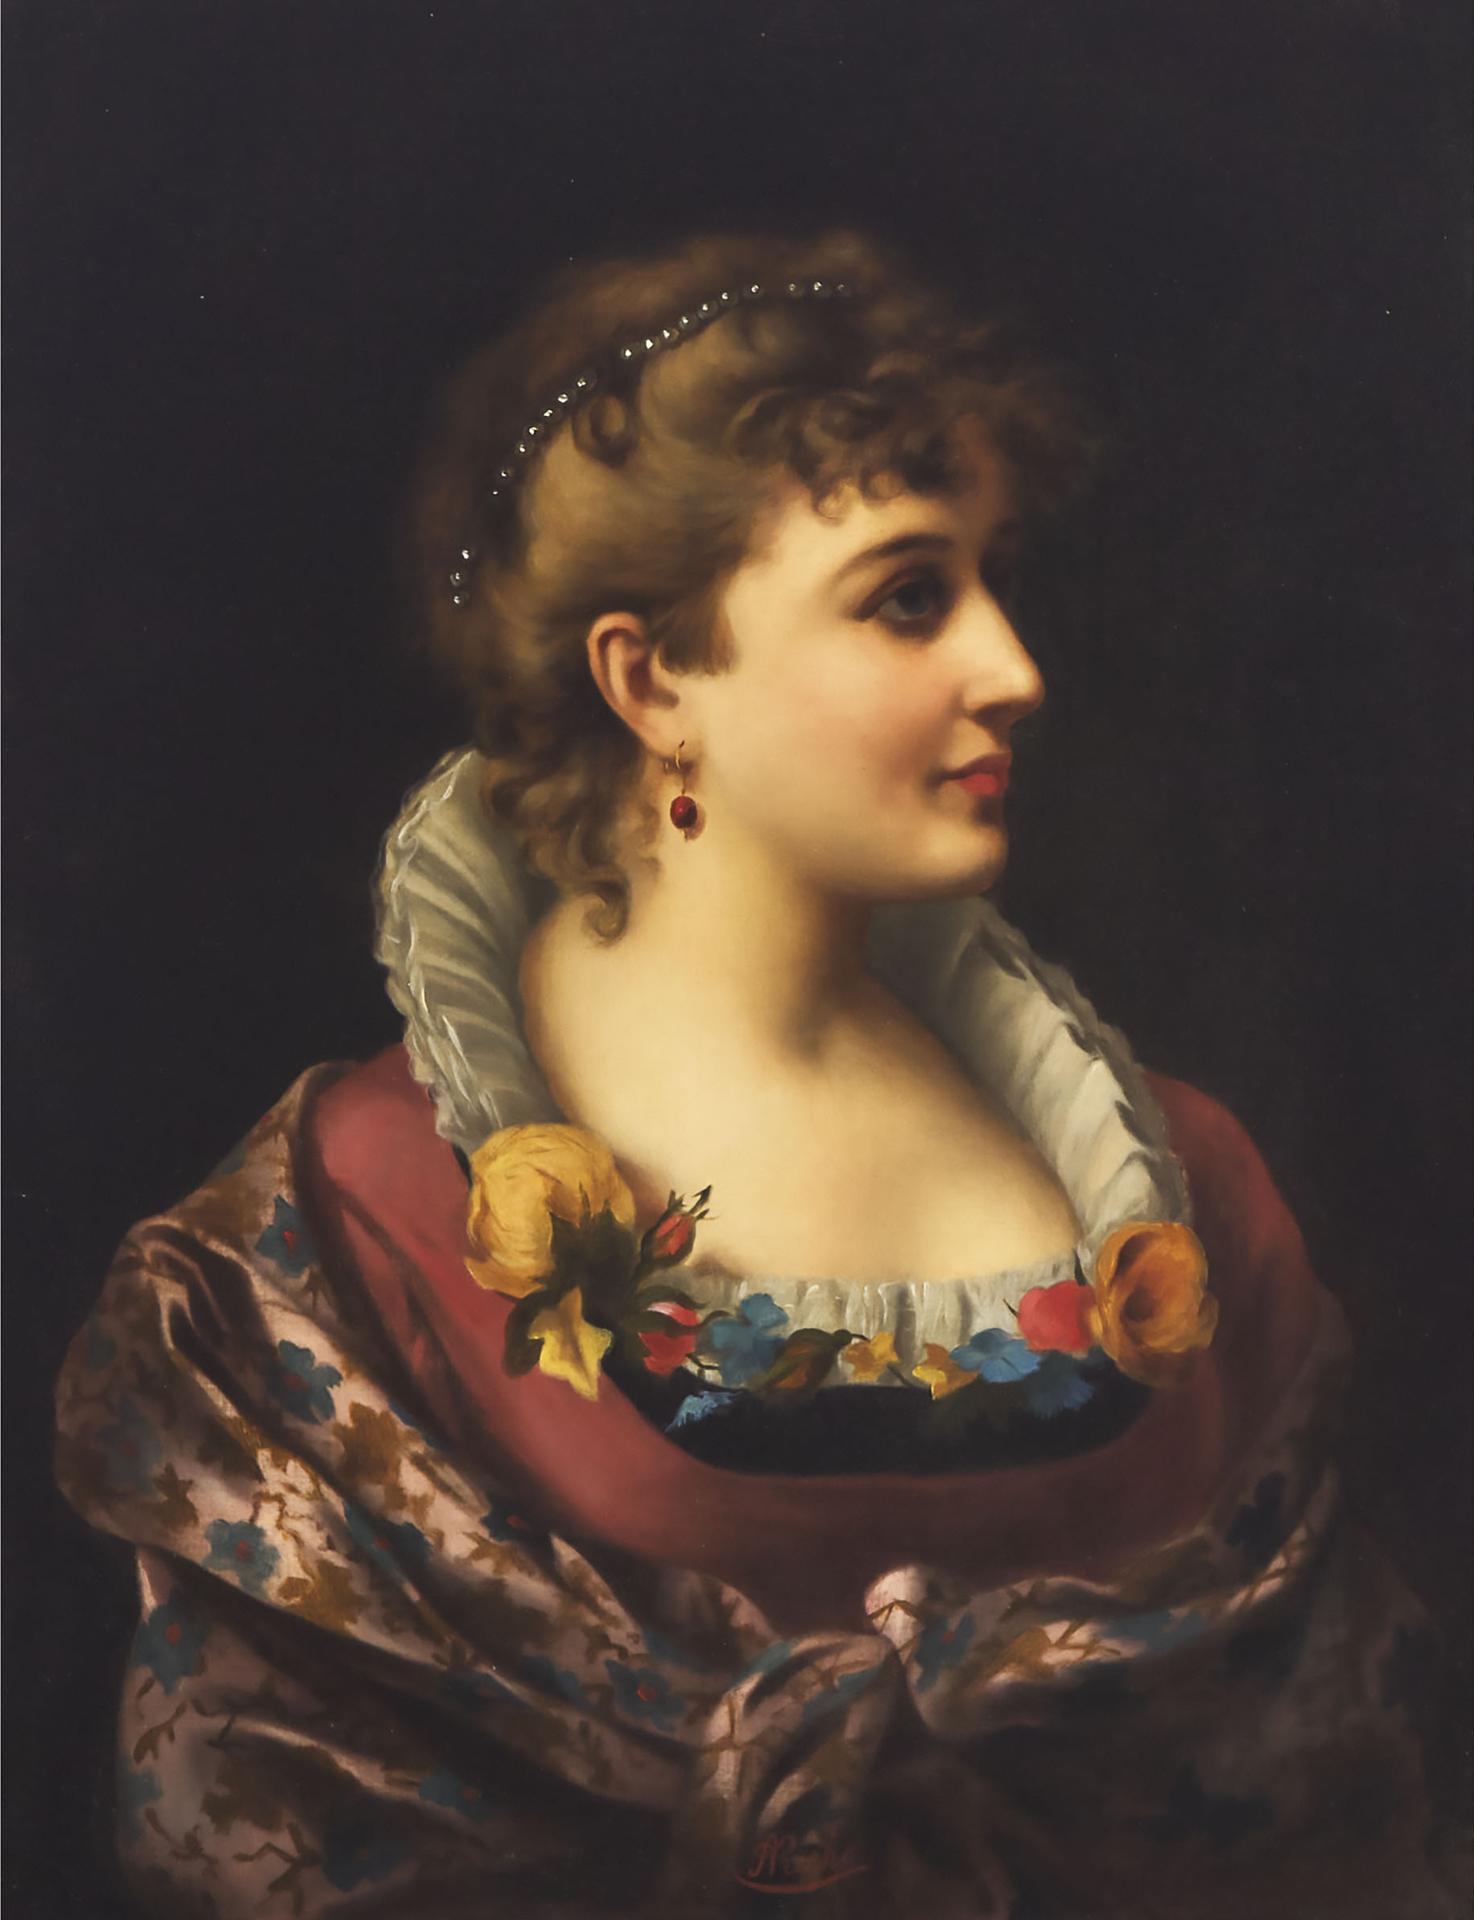 Adele Riche - Portrait Of A Lady, Bust Length In A Pink Dress With A Shawl